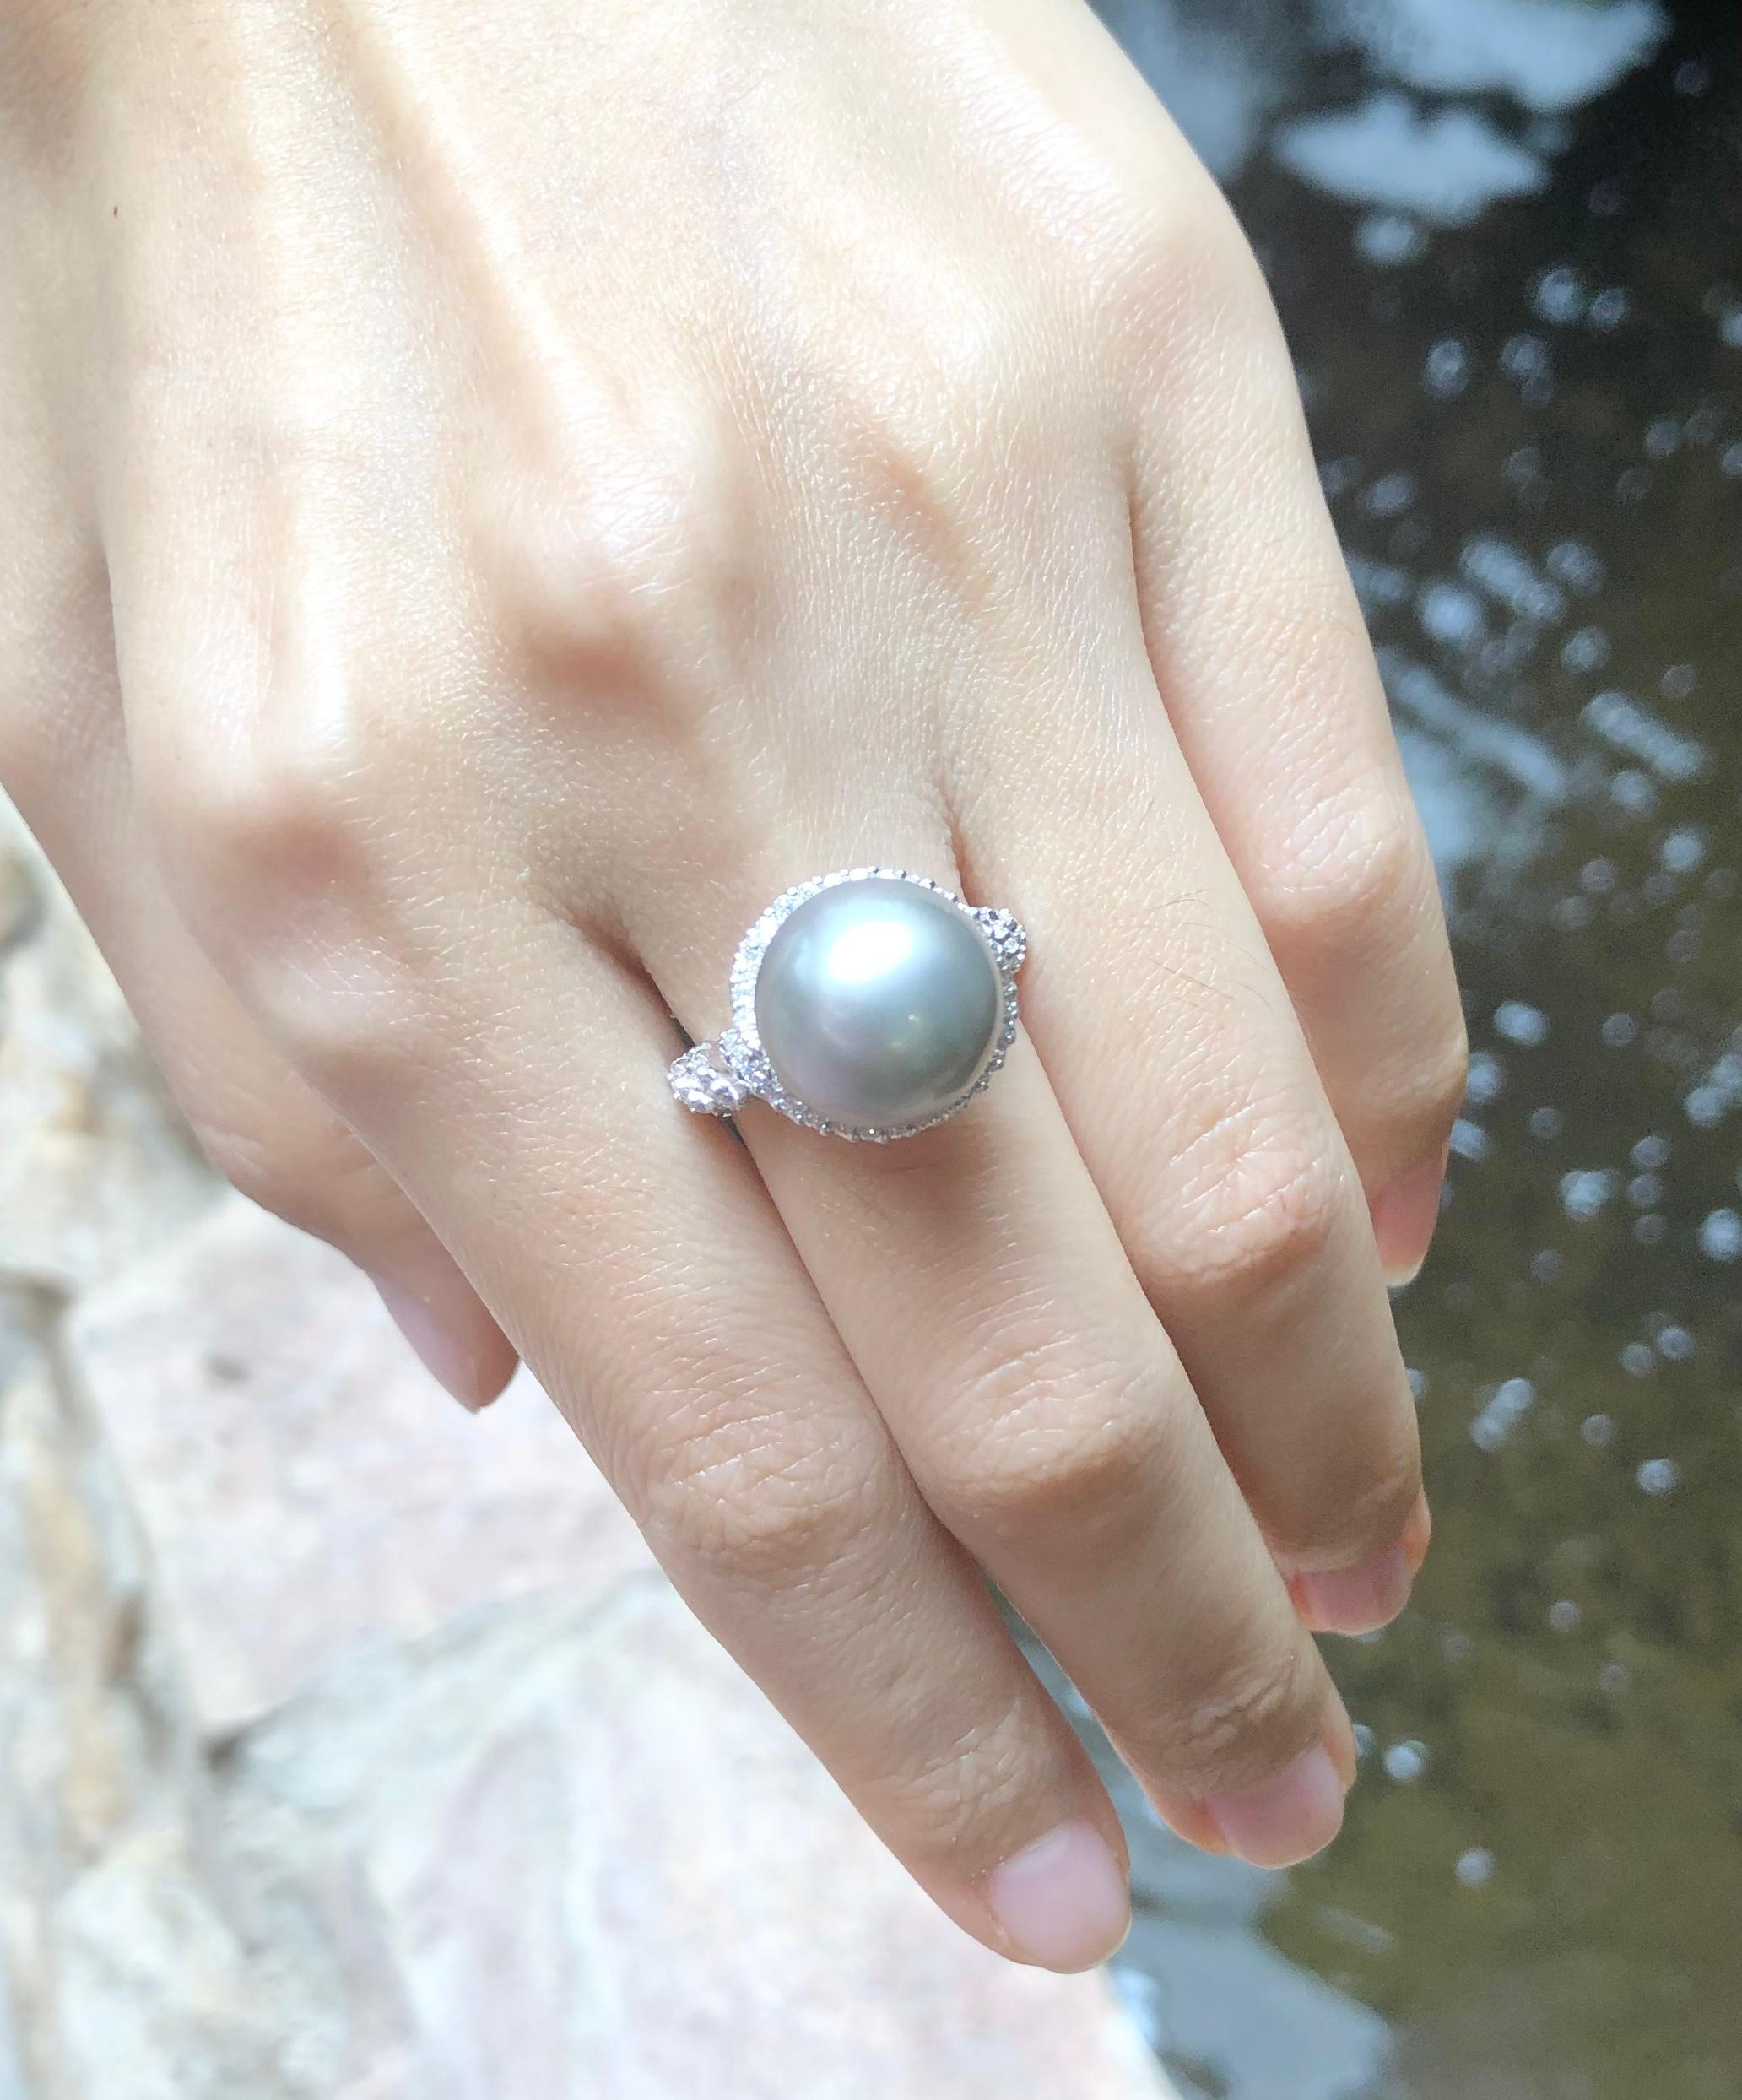 South Sea Pearl with Diamond 0.53 carat Ring set in 18 Karat White Gold Settings

Width:  1.5 cm 
Length: 1.5 cm
Ring Size: 53
Total Weight: 8.68 grams

South Sea Pearl: 12.5 mm

